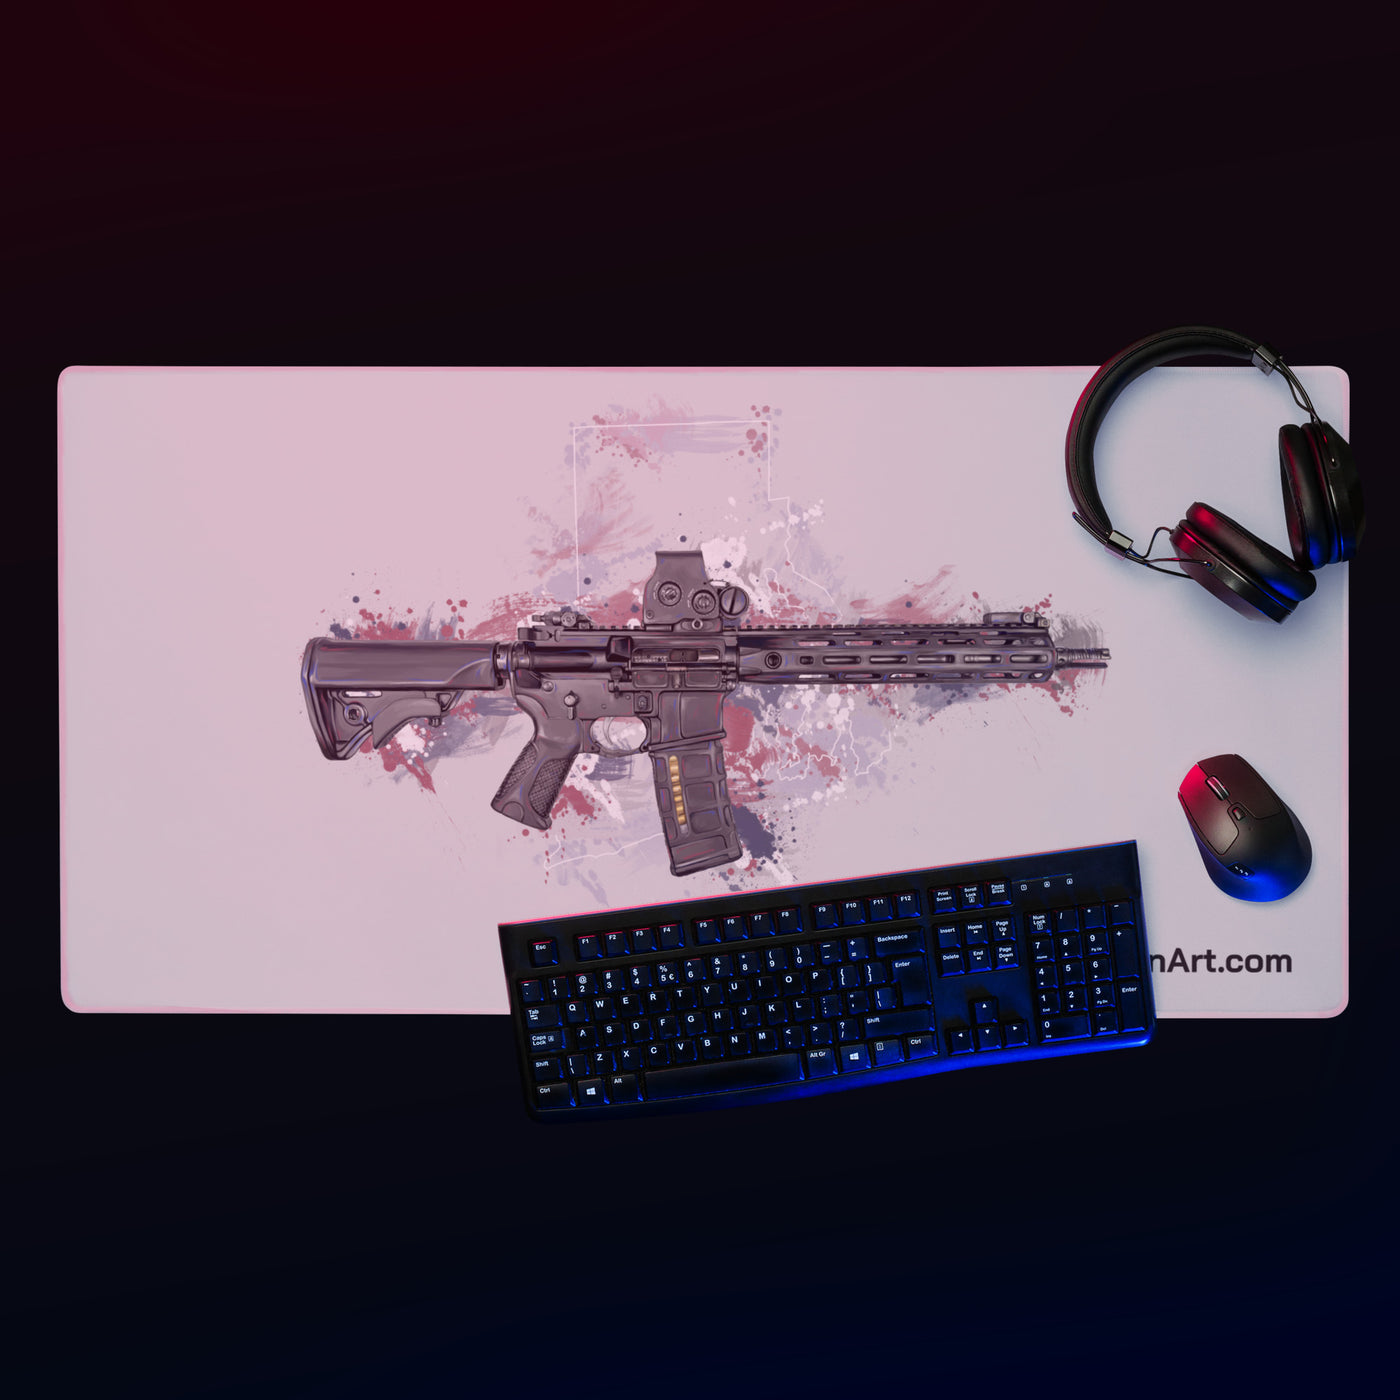 Defending Freedom - Rhode Island - AR-15 State Gaming Mouse Pad - White State